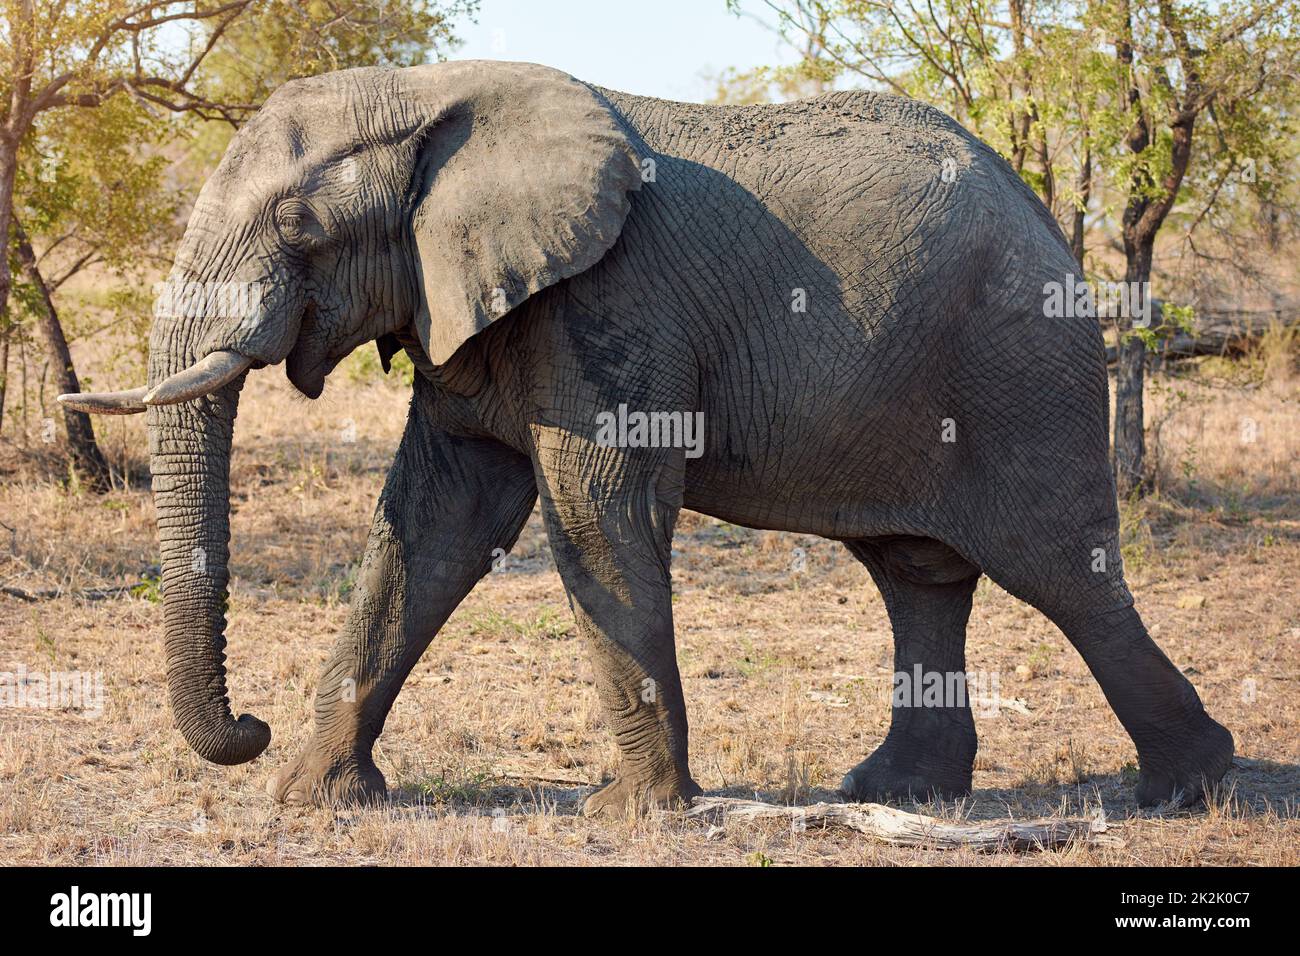 Thunderous footsteps. Full length shot of an elephant in the wild. Stock Photo